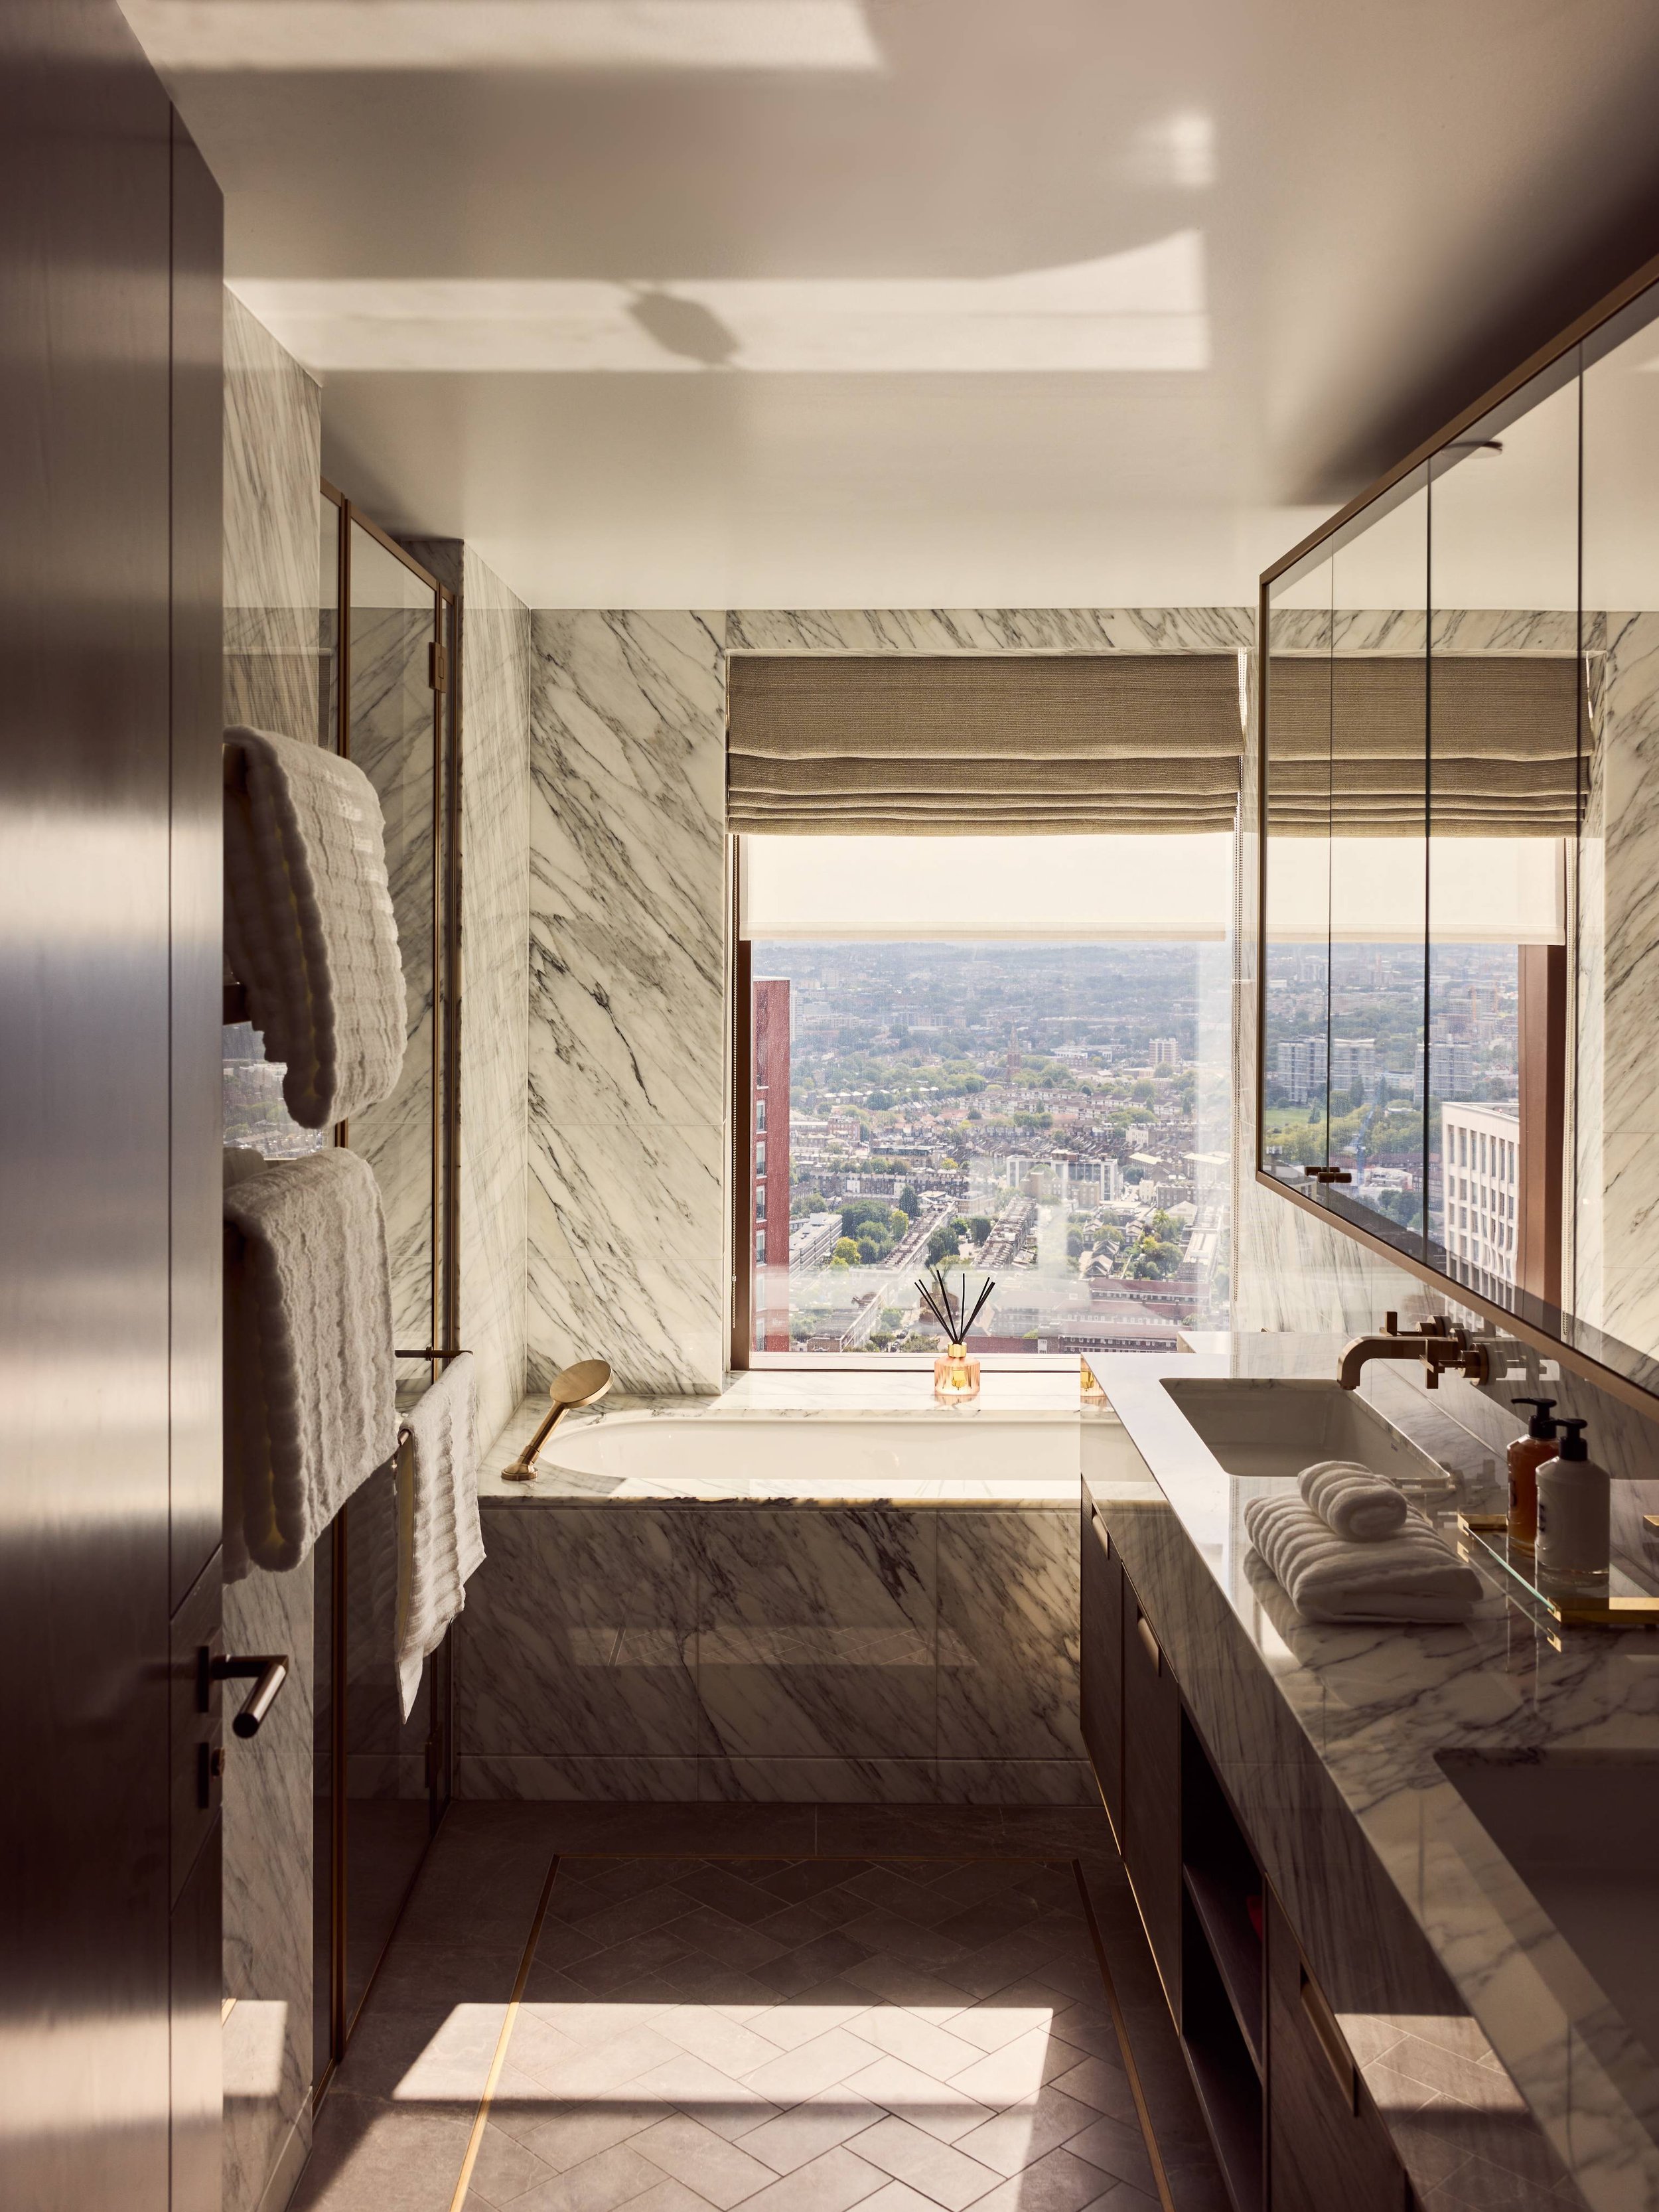 Thames City_Sky Collection_Harrods Interior Design Show Apartment_Bathroom_Credit-TobyMitchell2023-.jpg